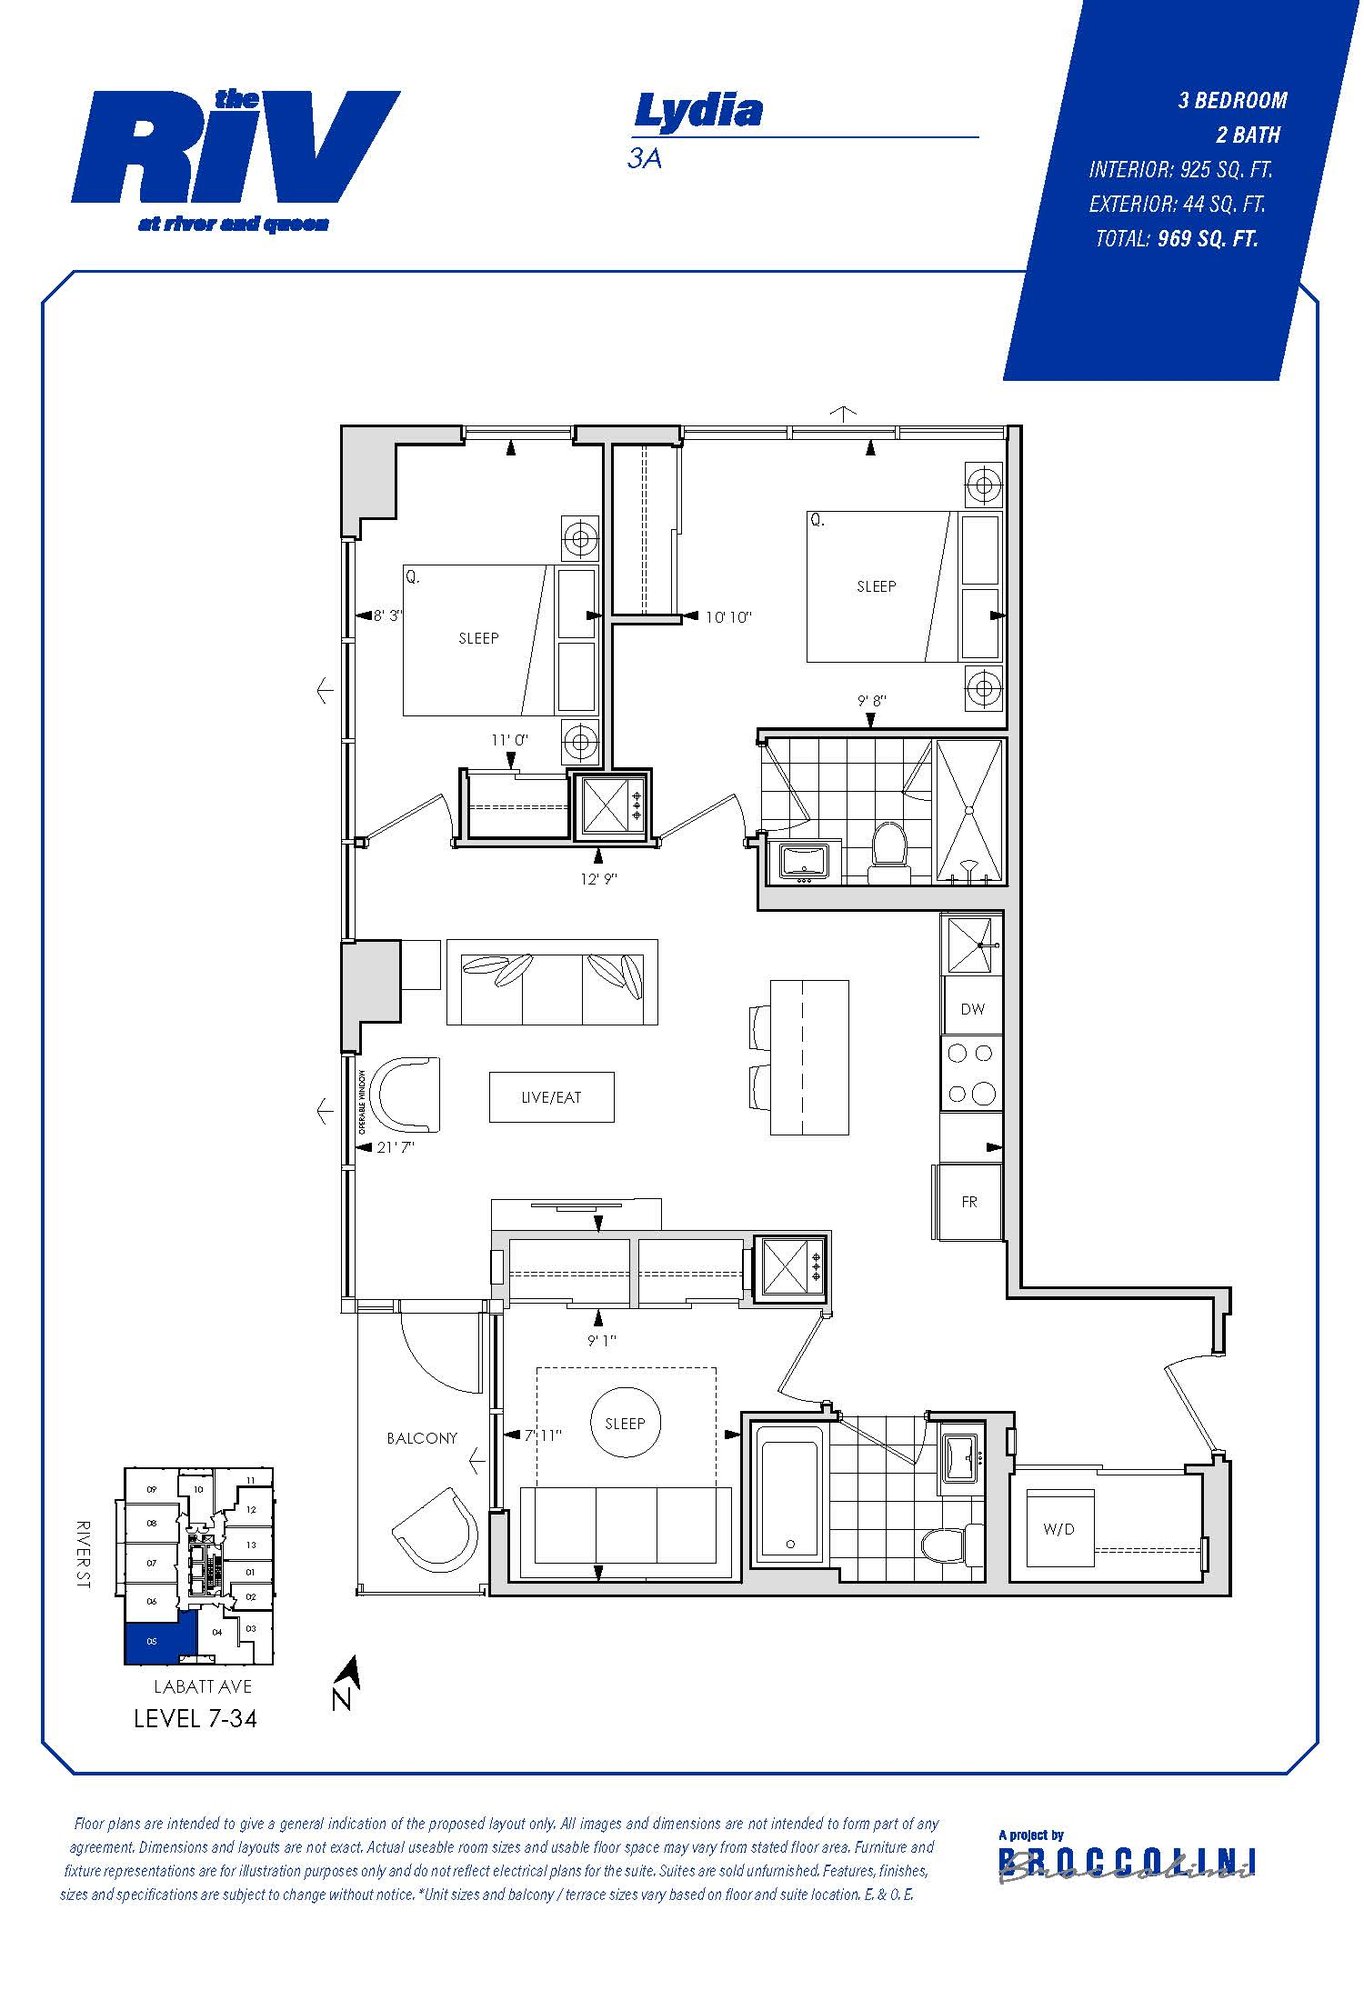 Floor plan for Lydia two bedroom unit in The Riv